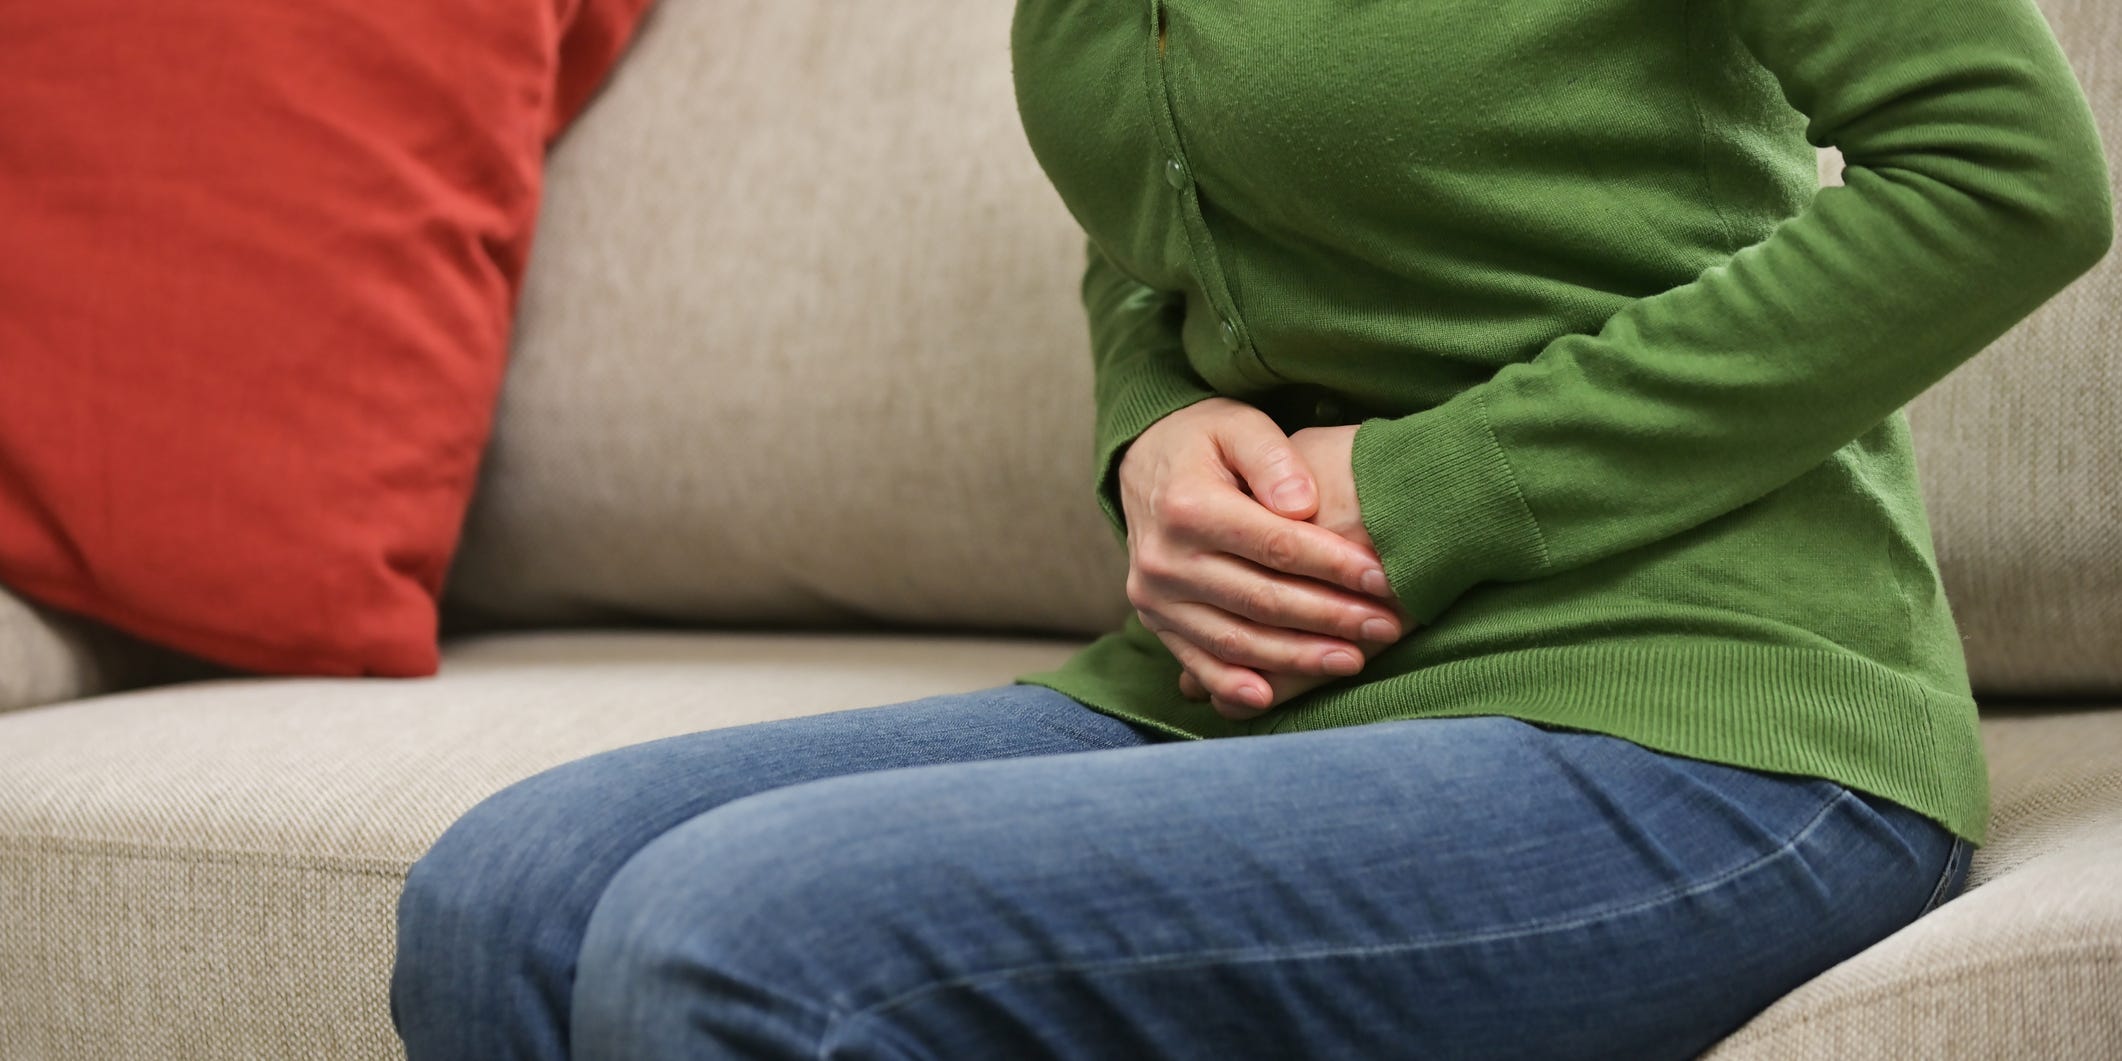 A woman sitting on a couch in a green shirt and jeans clutches her stomach in pain.